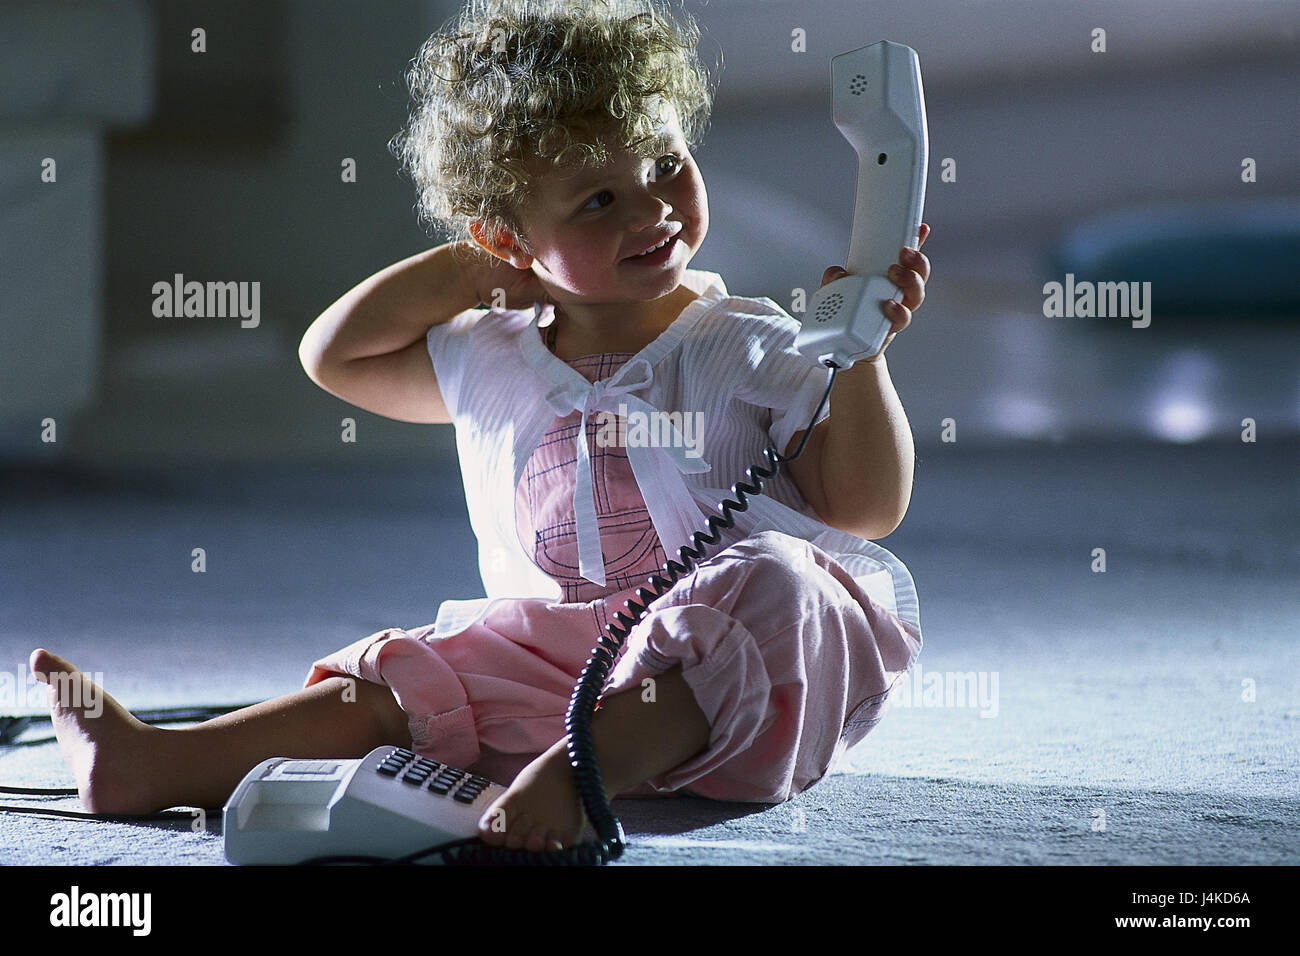 Infant, floor, sit, call up at home, baby, child, girl, smile, play childhood, phone, apparatus, pushbutton telephone, fixed network, receiver, Stock Photo